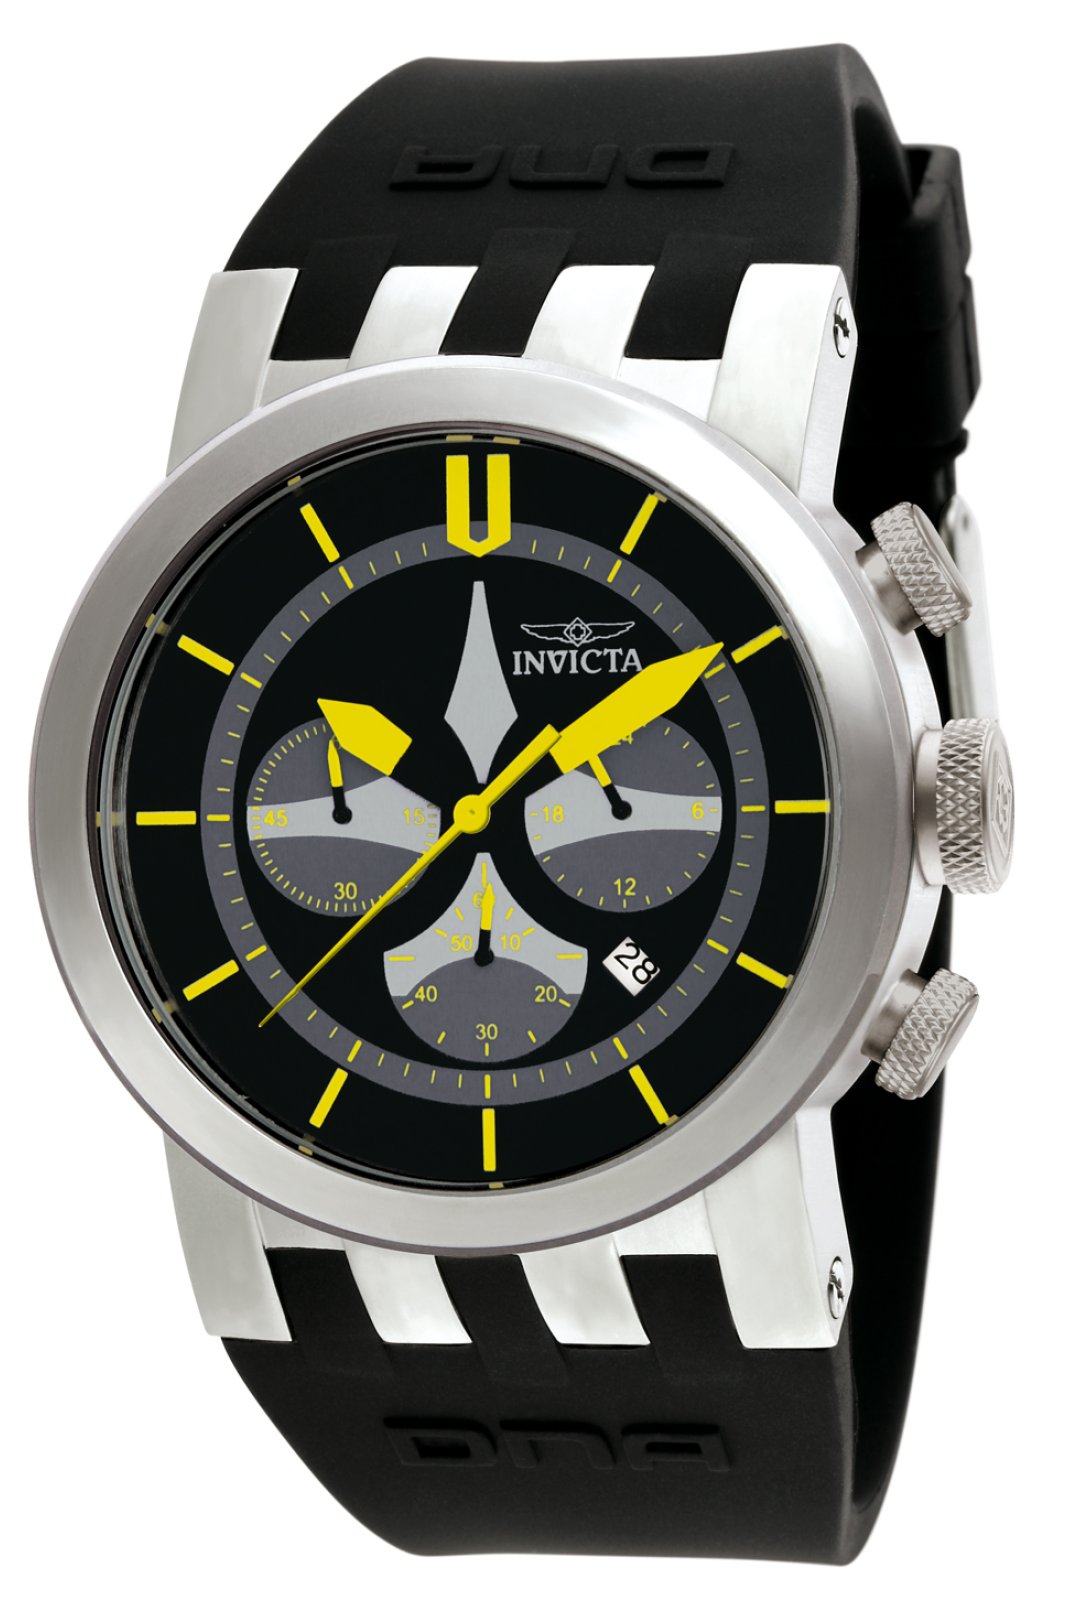 Invicta Watch DNA 10398 - Official Invicta Store - Buy Online!